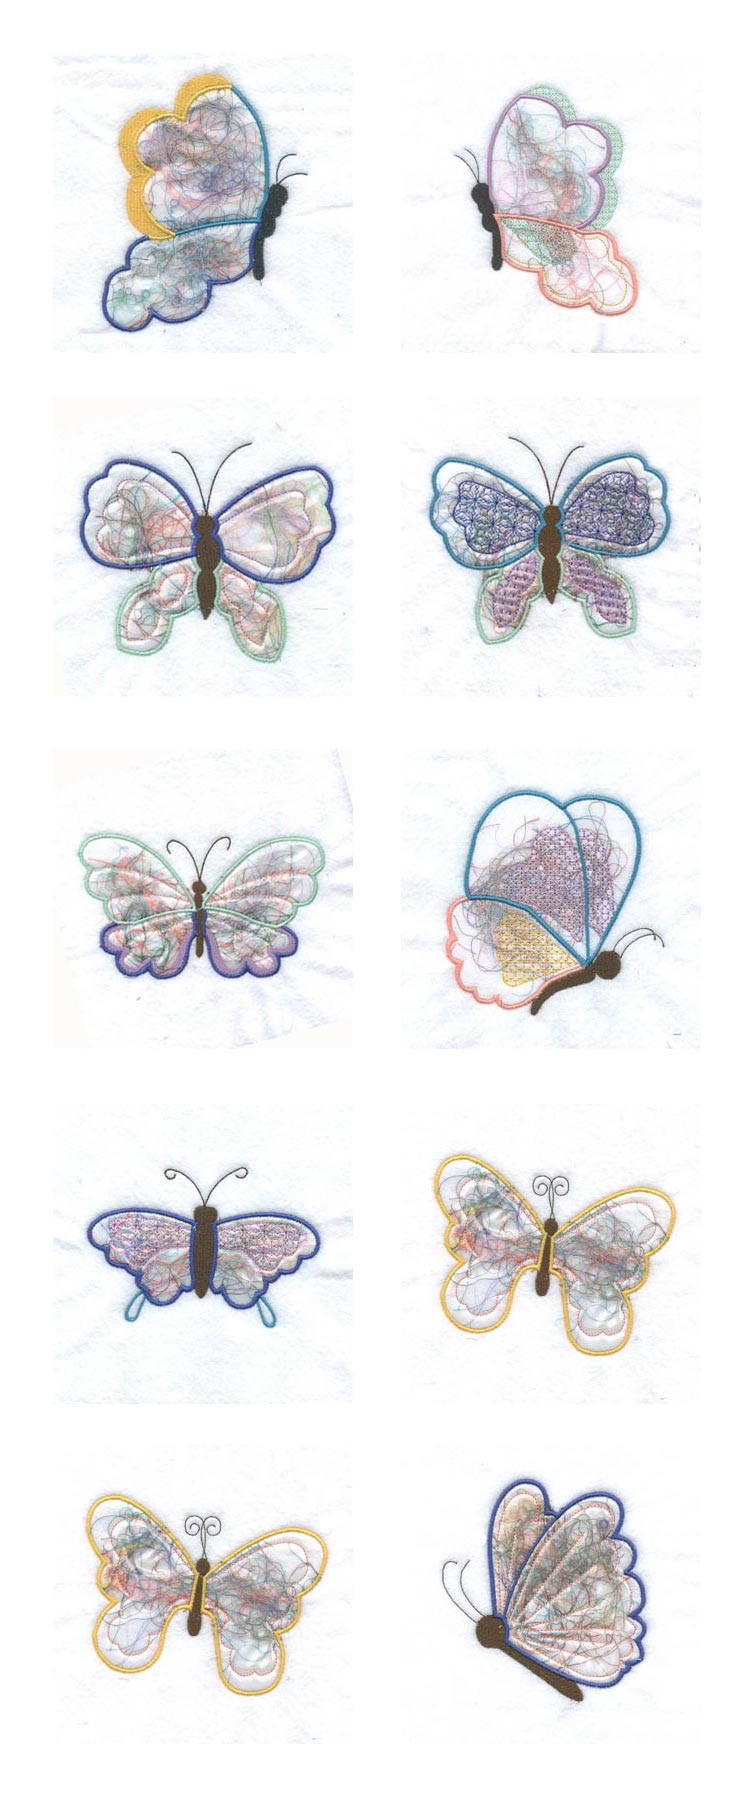 Shimmering Butterflies Embroidery Machine Design Details